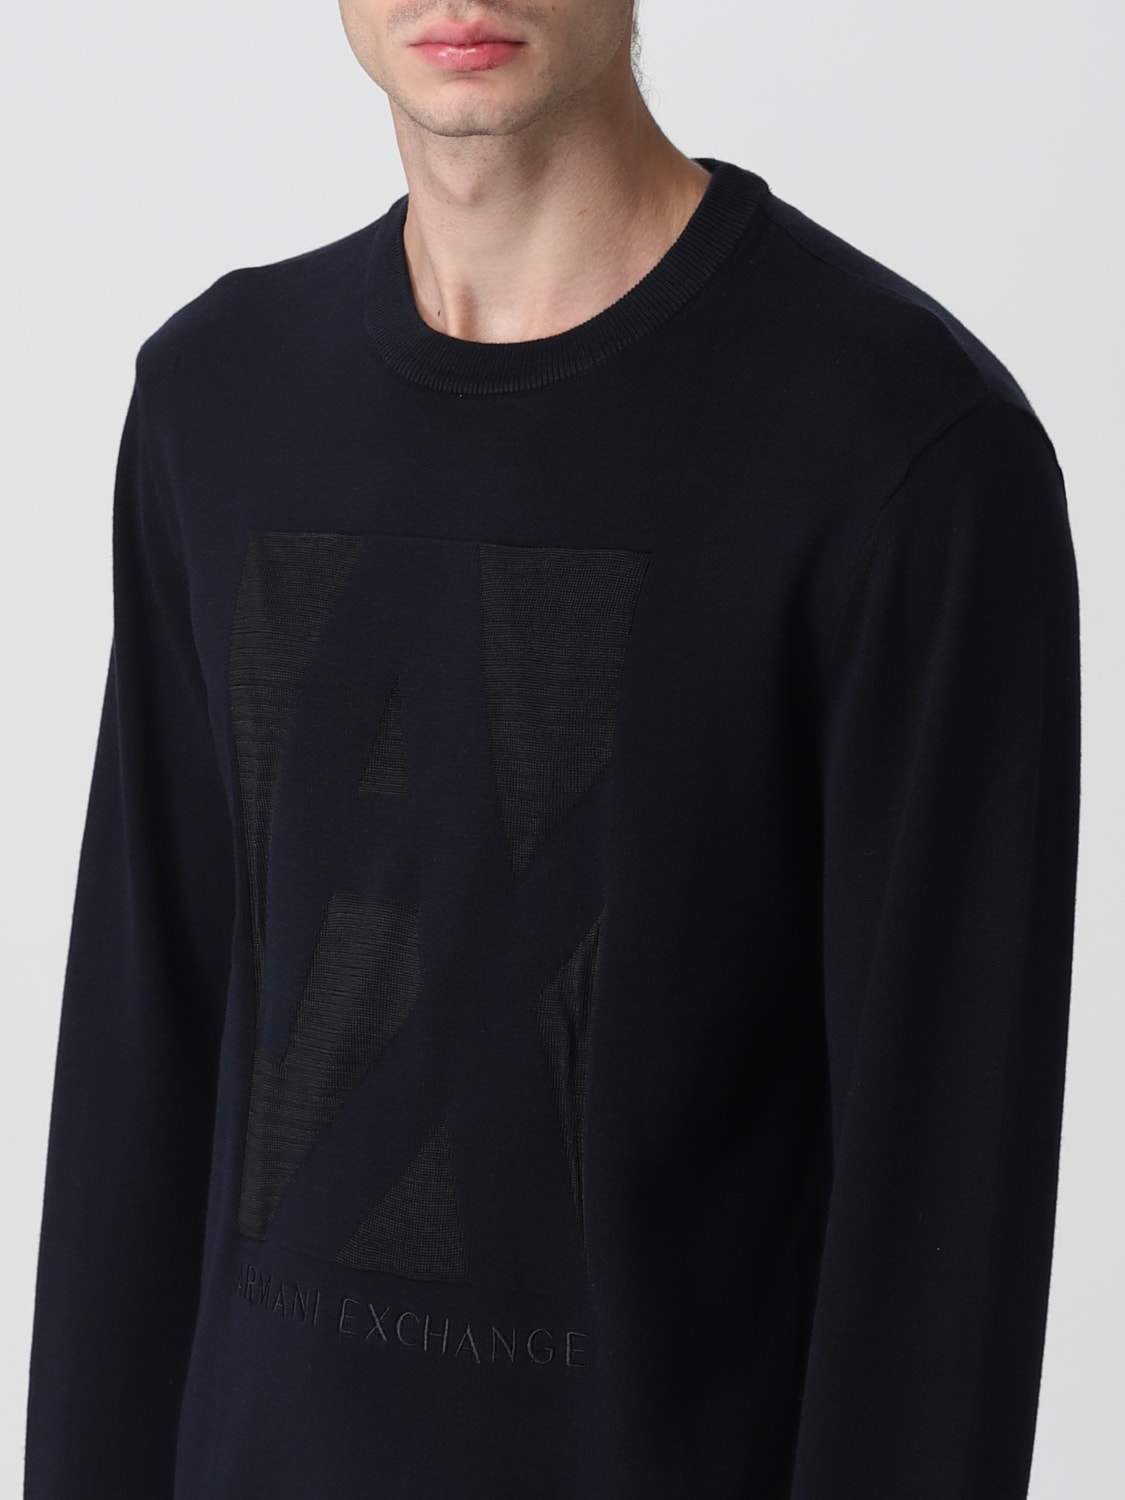 Armani Exchange Outlet: sweater for man - Navy | Armani Exchange ...